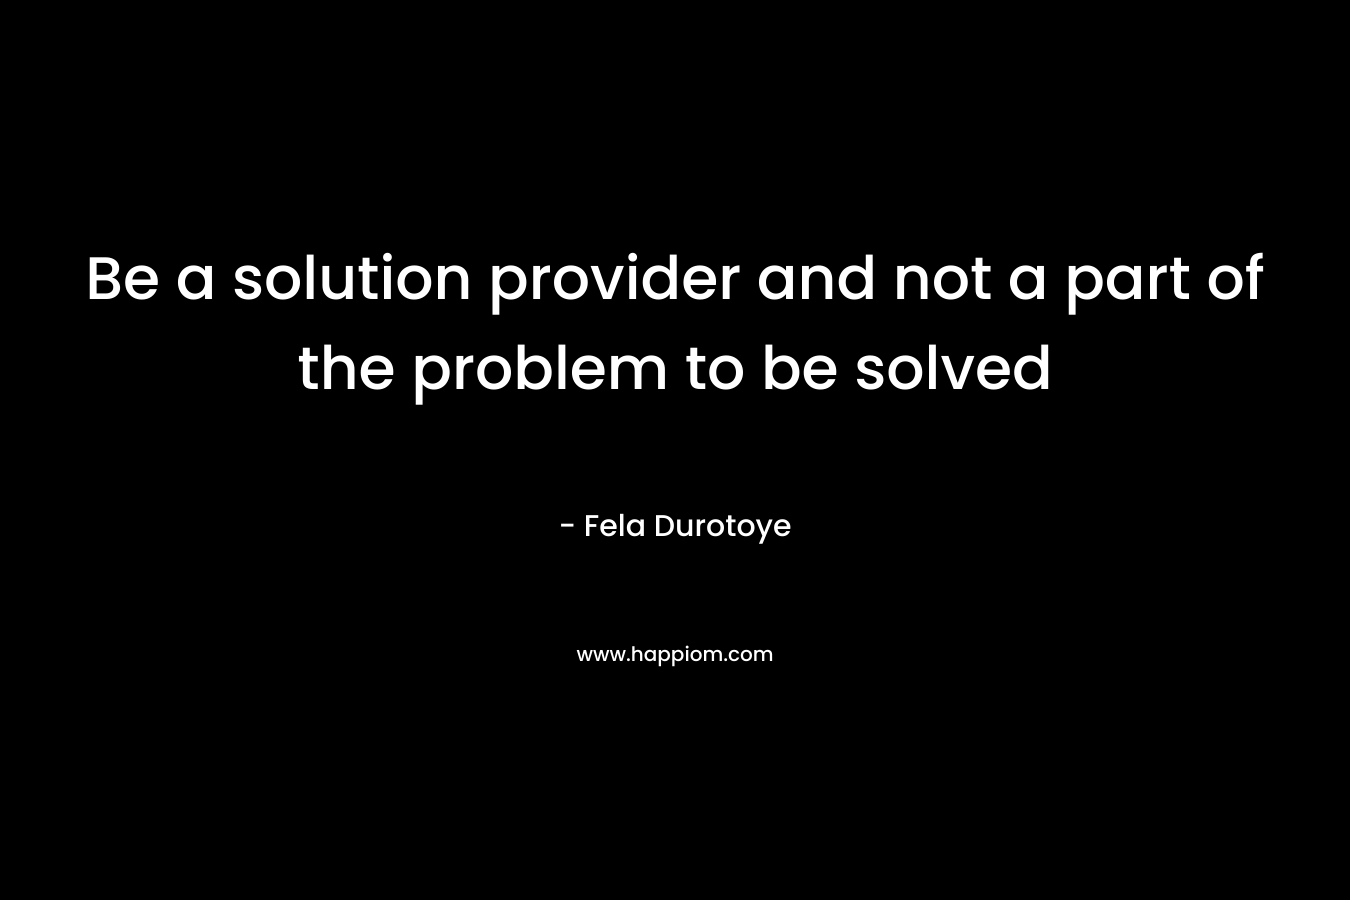 Be a solution provider and not a part of the problem to be solved